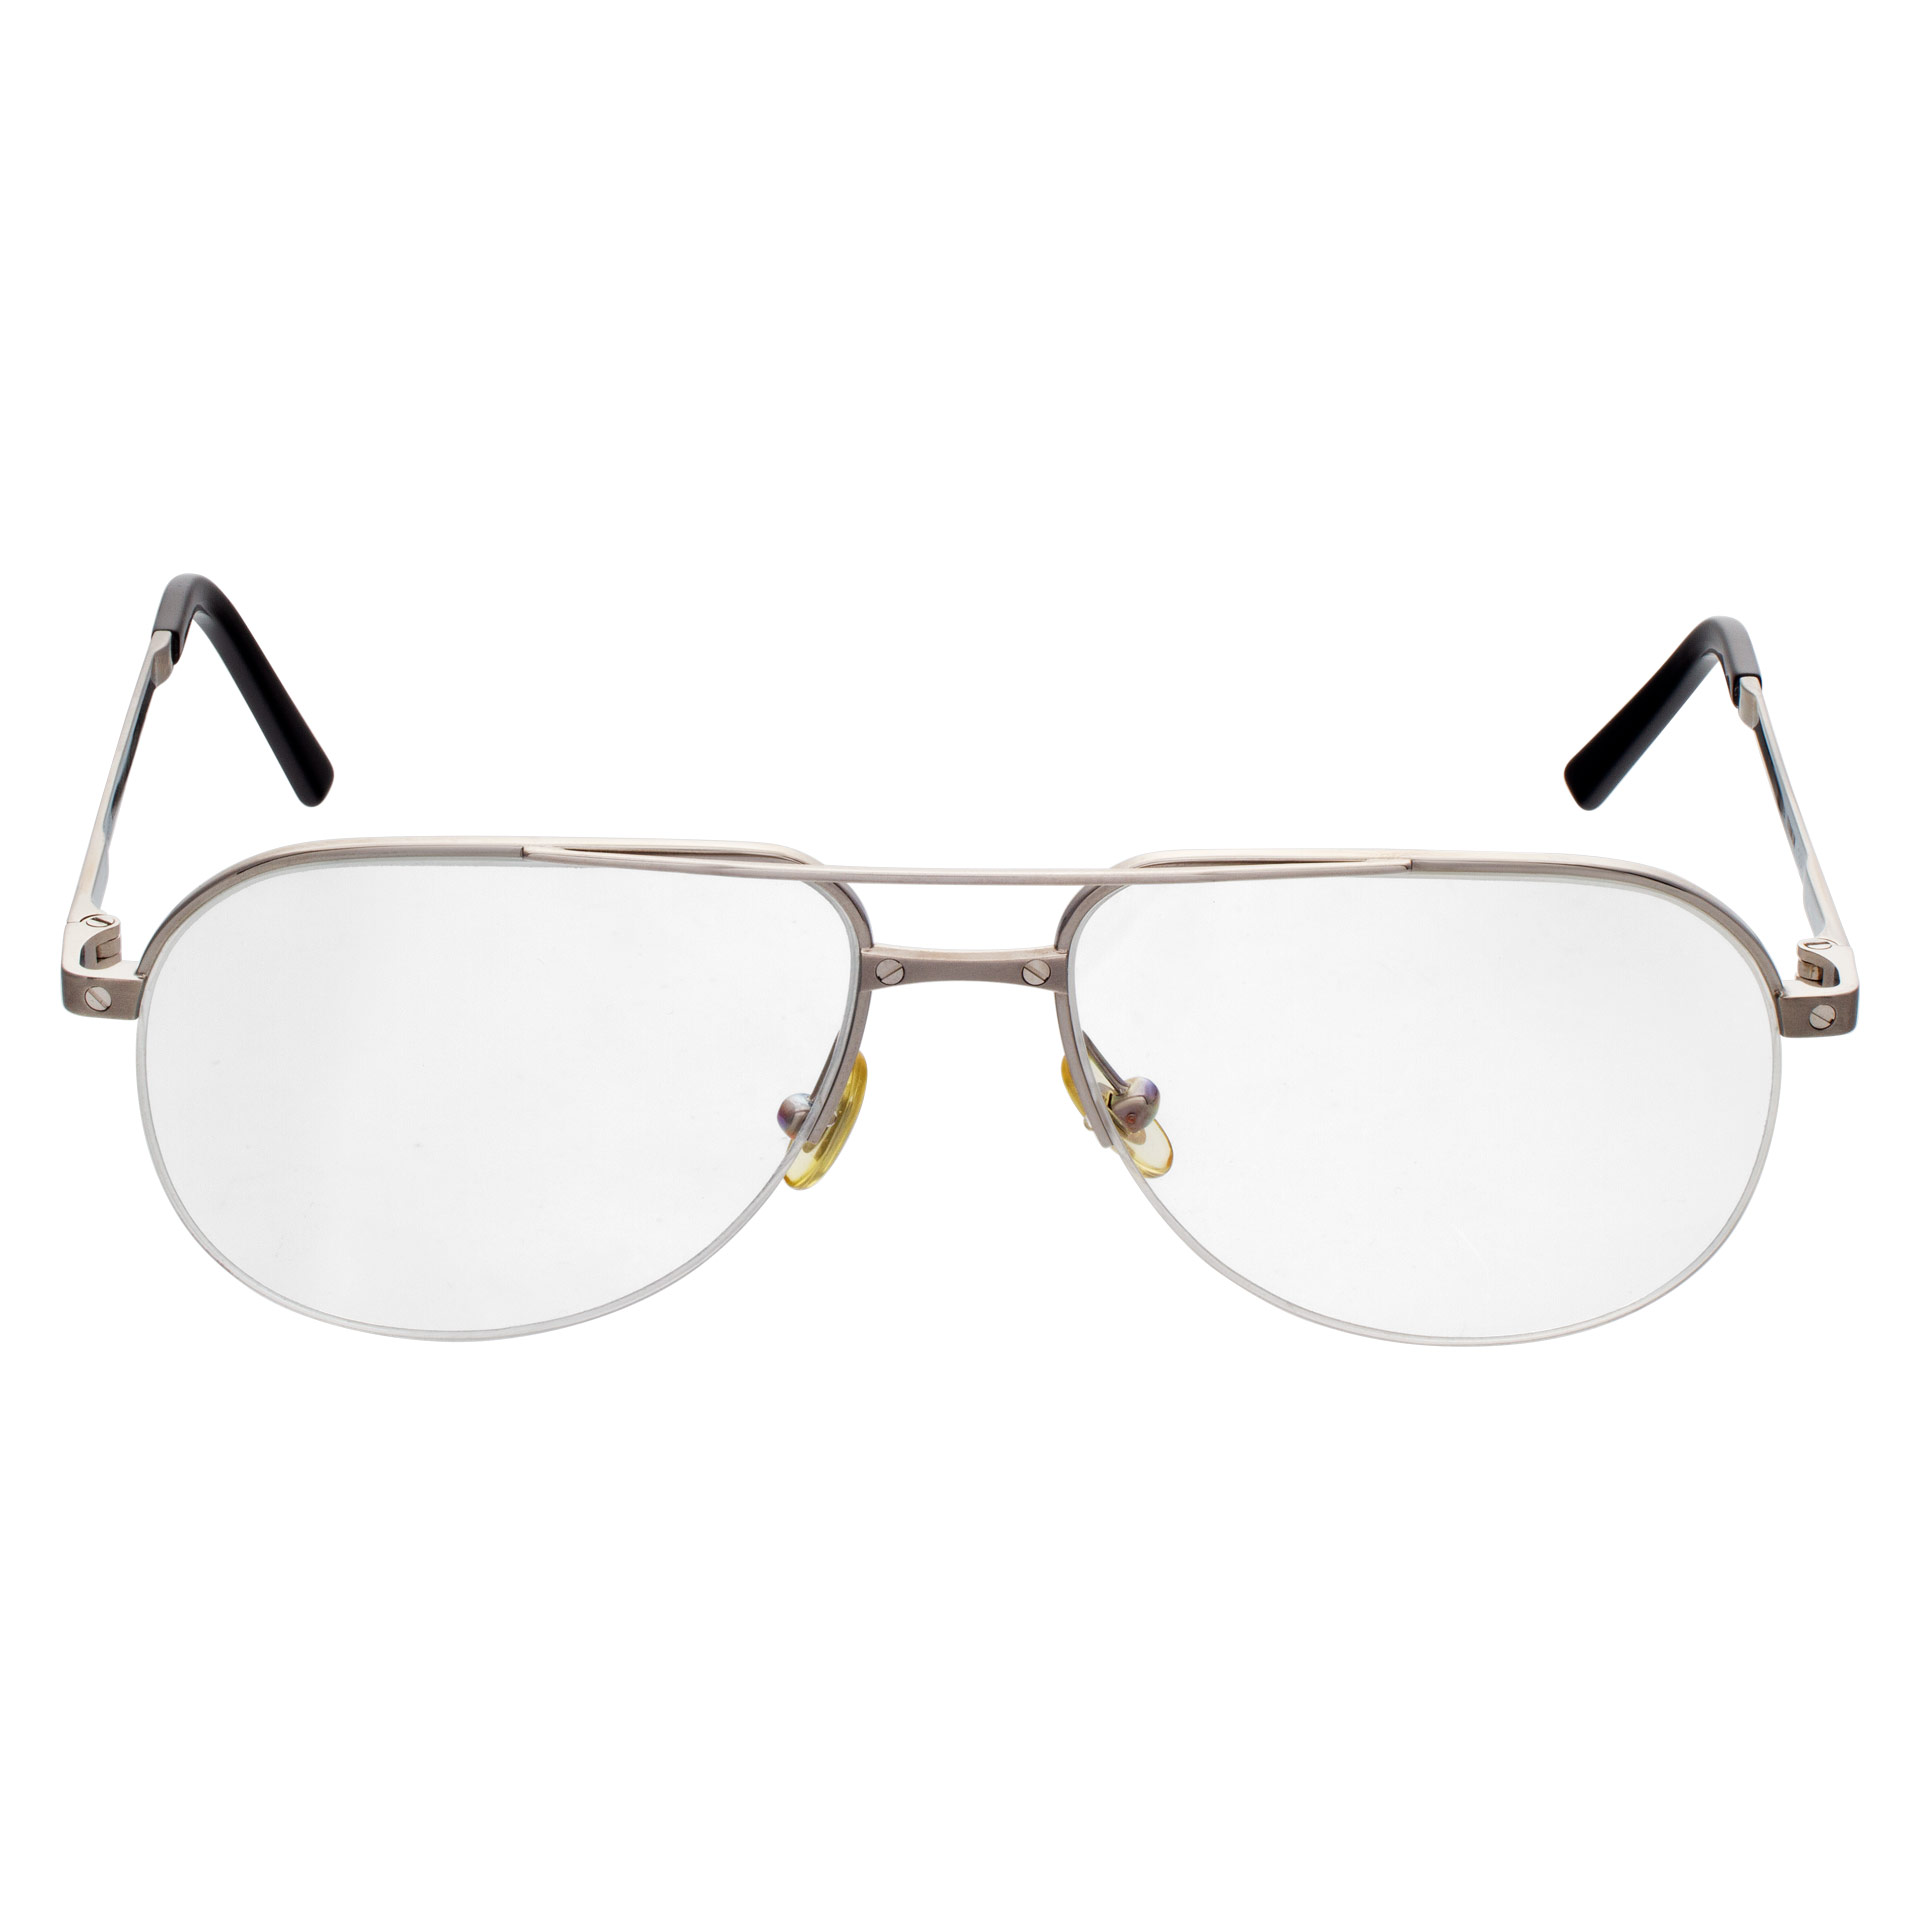 Cartier glasses stainless steel frame image 3